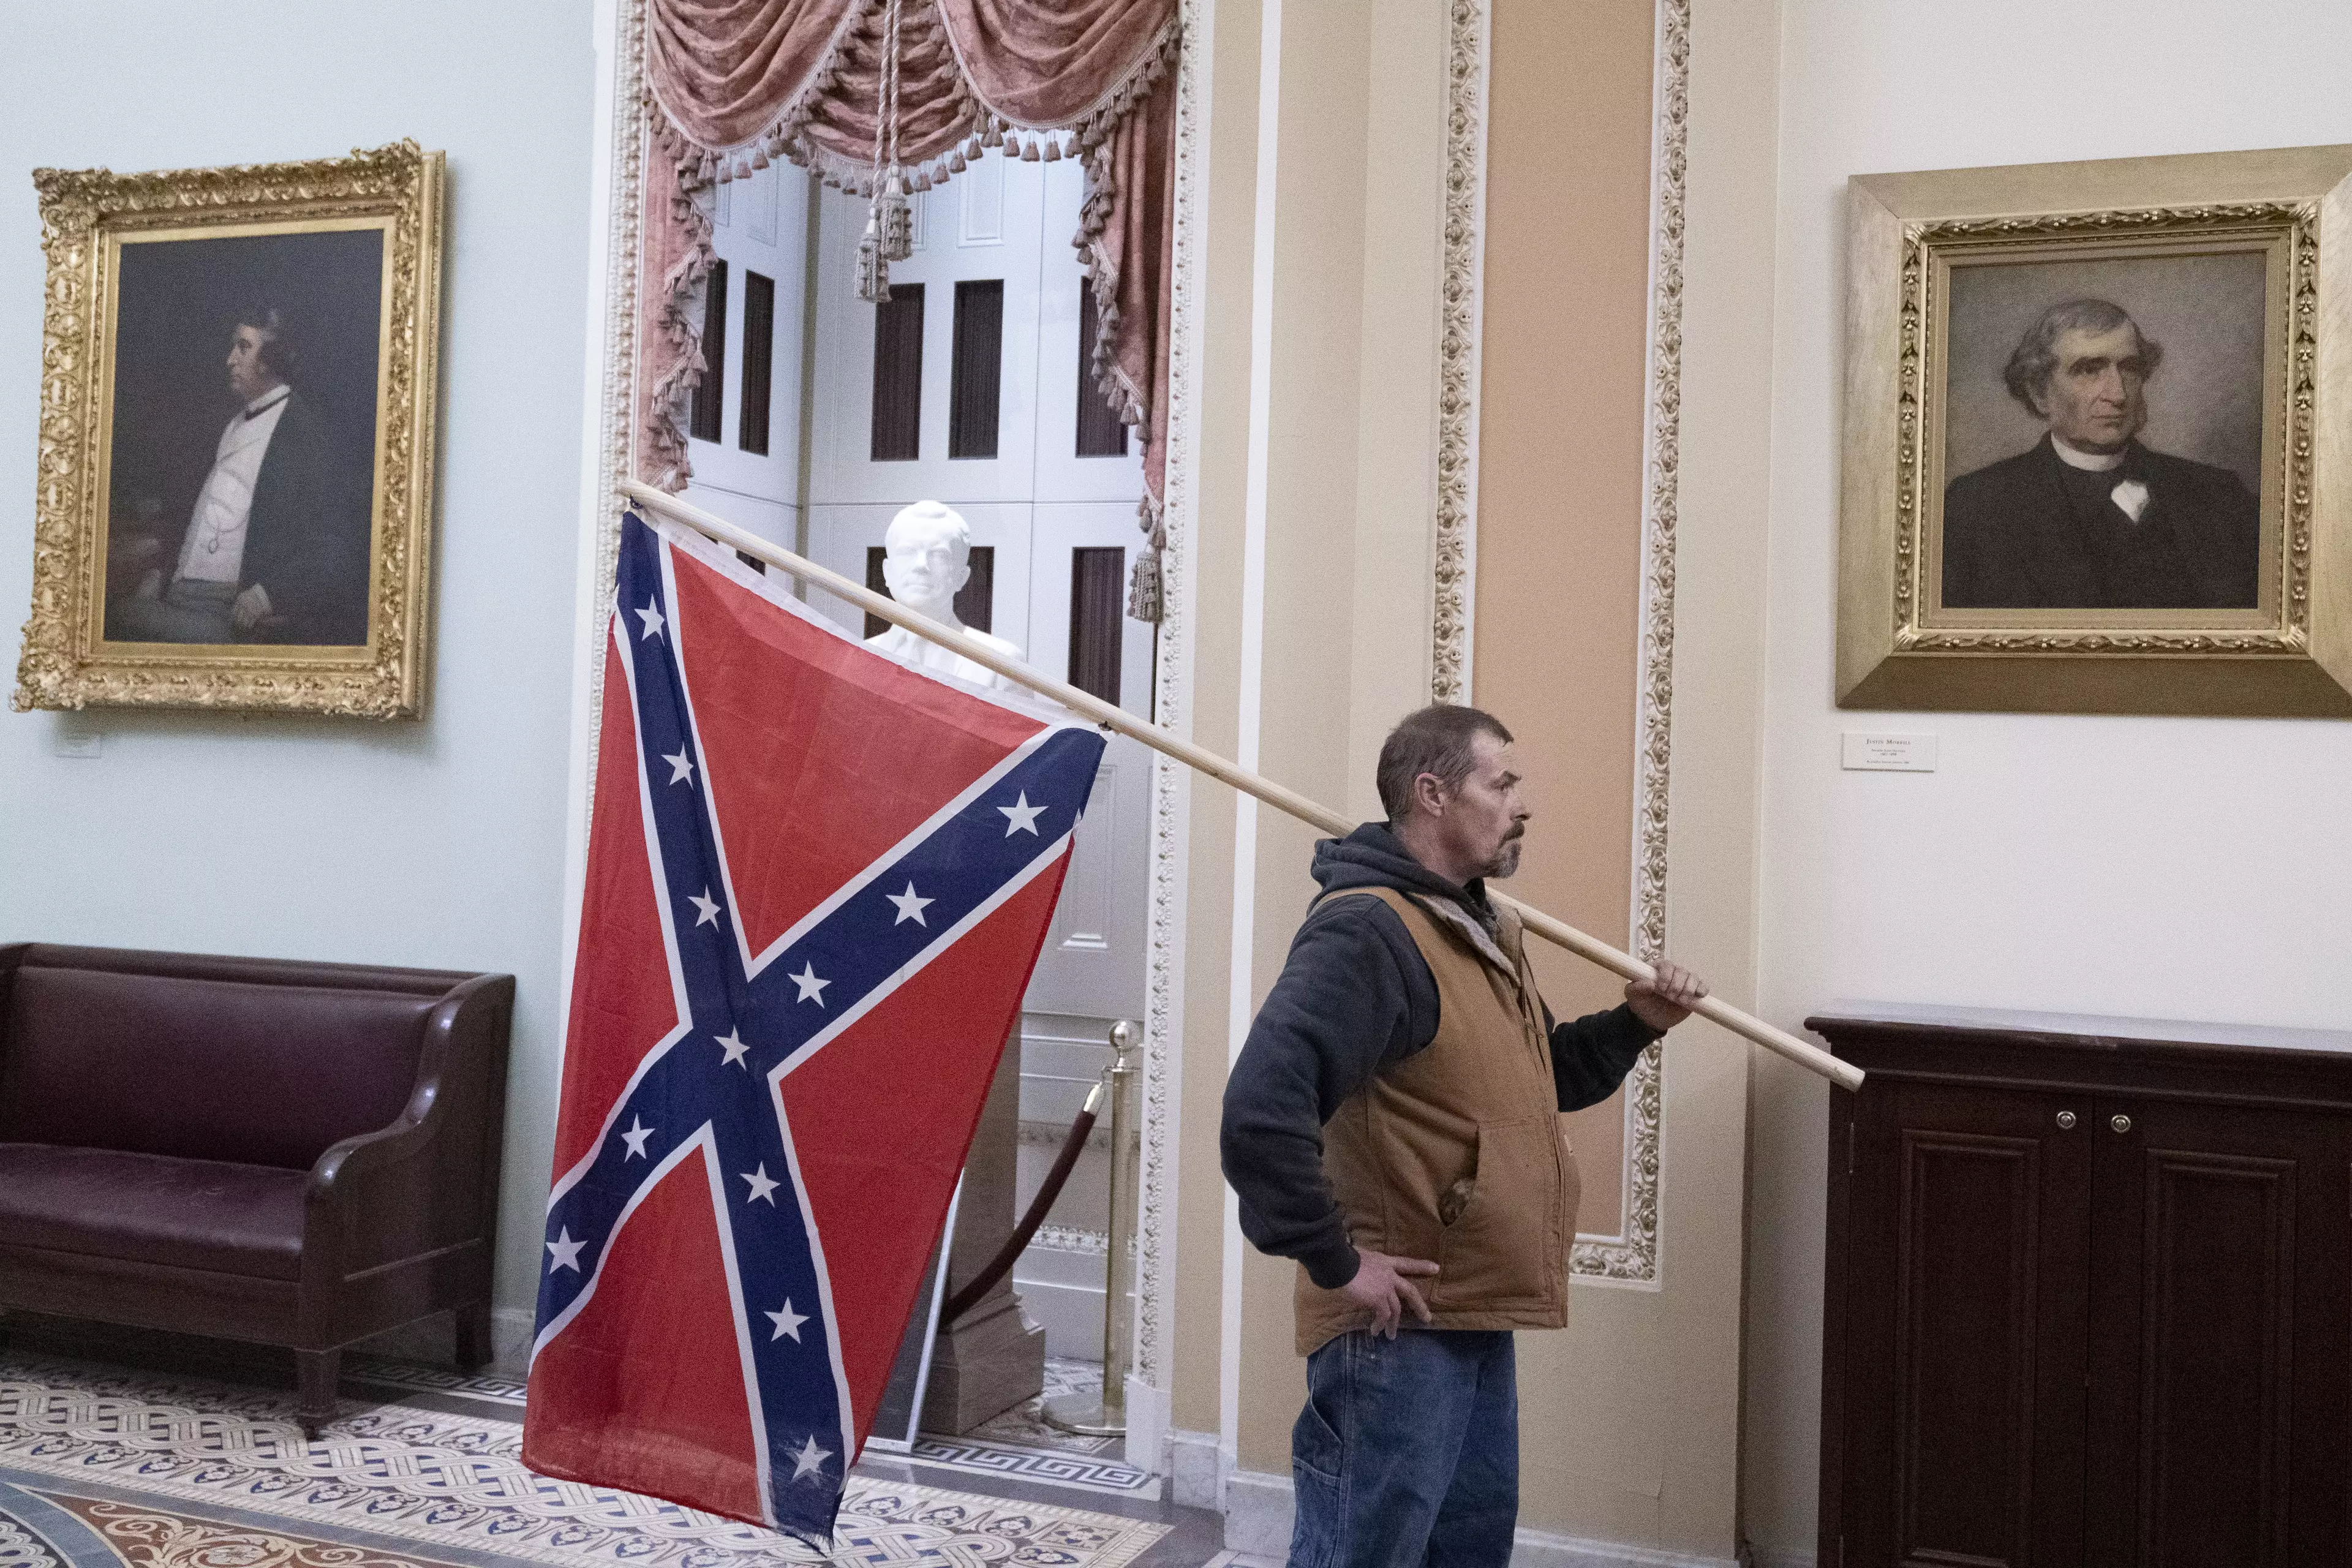 A rioter stands with the Confederate flag in the Capitol.